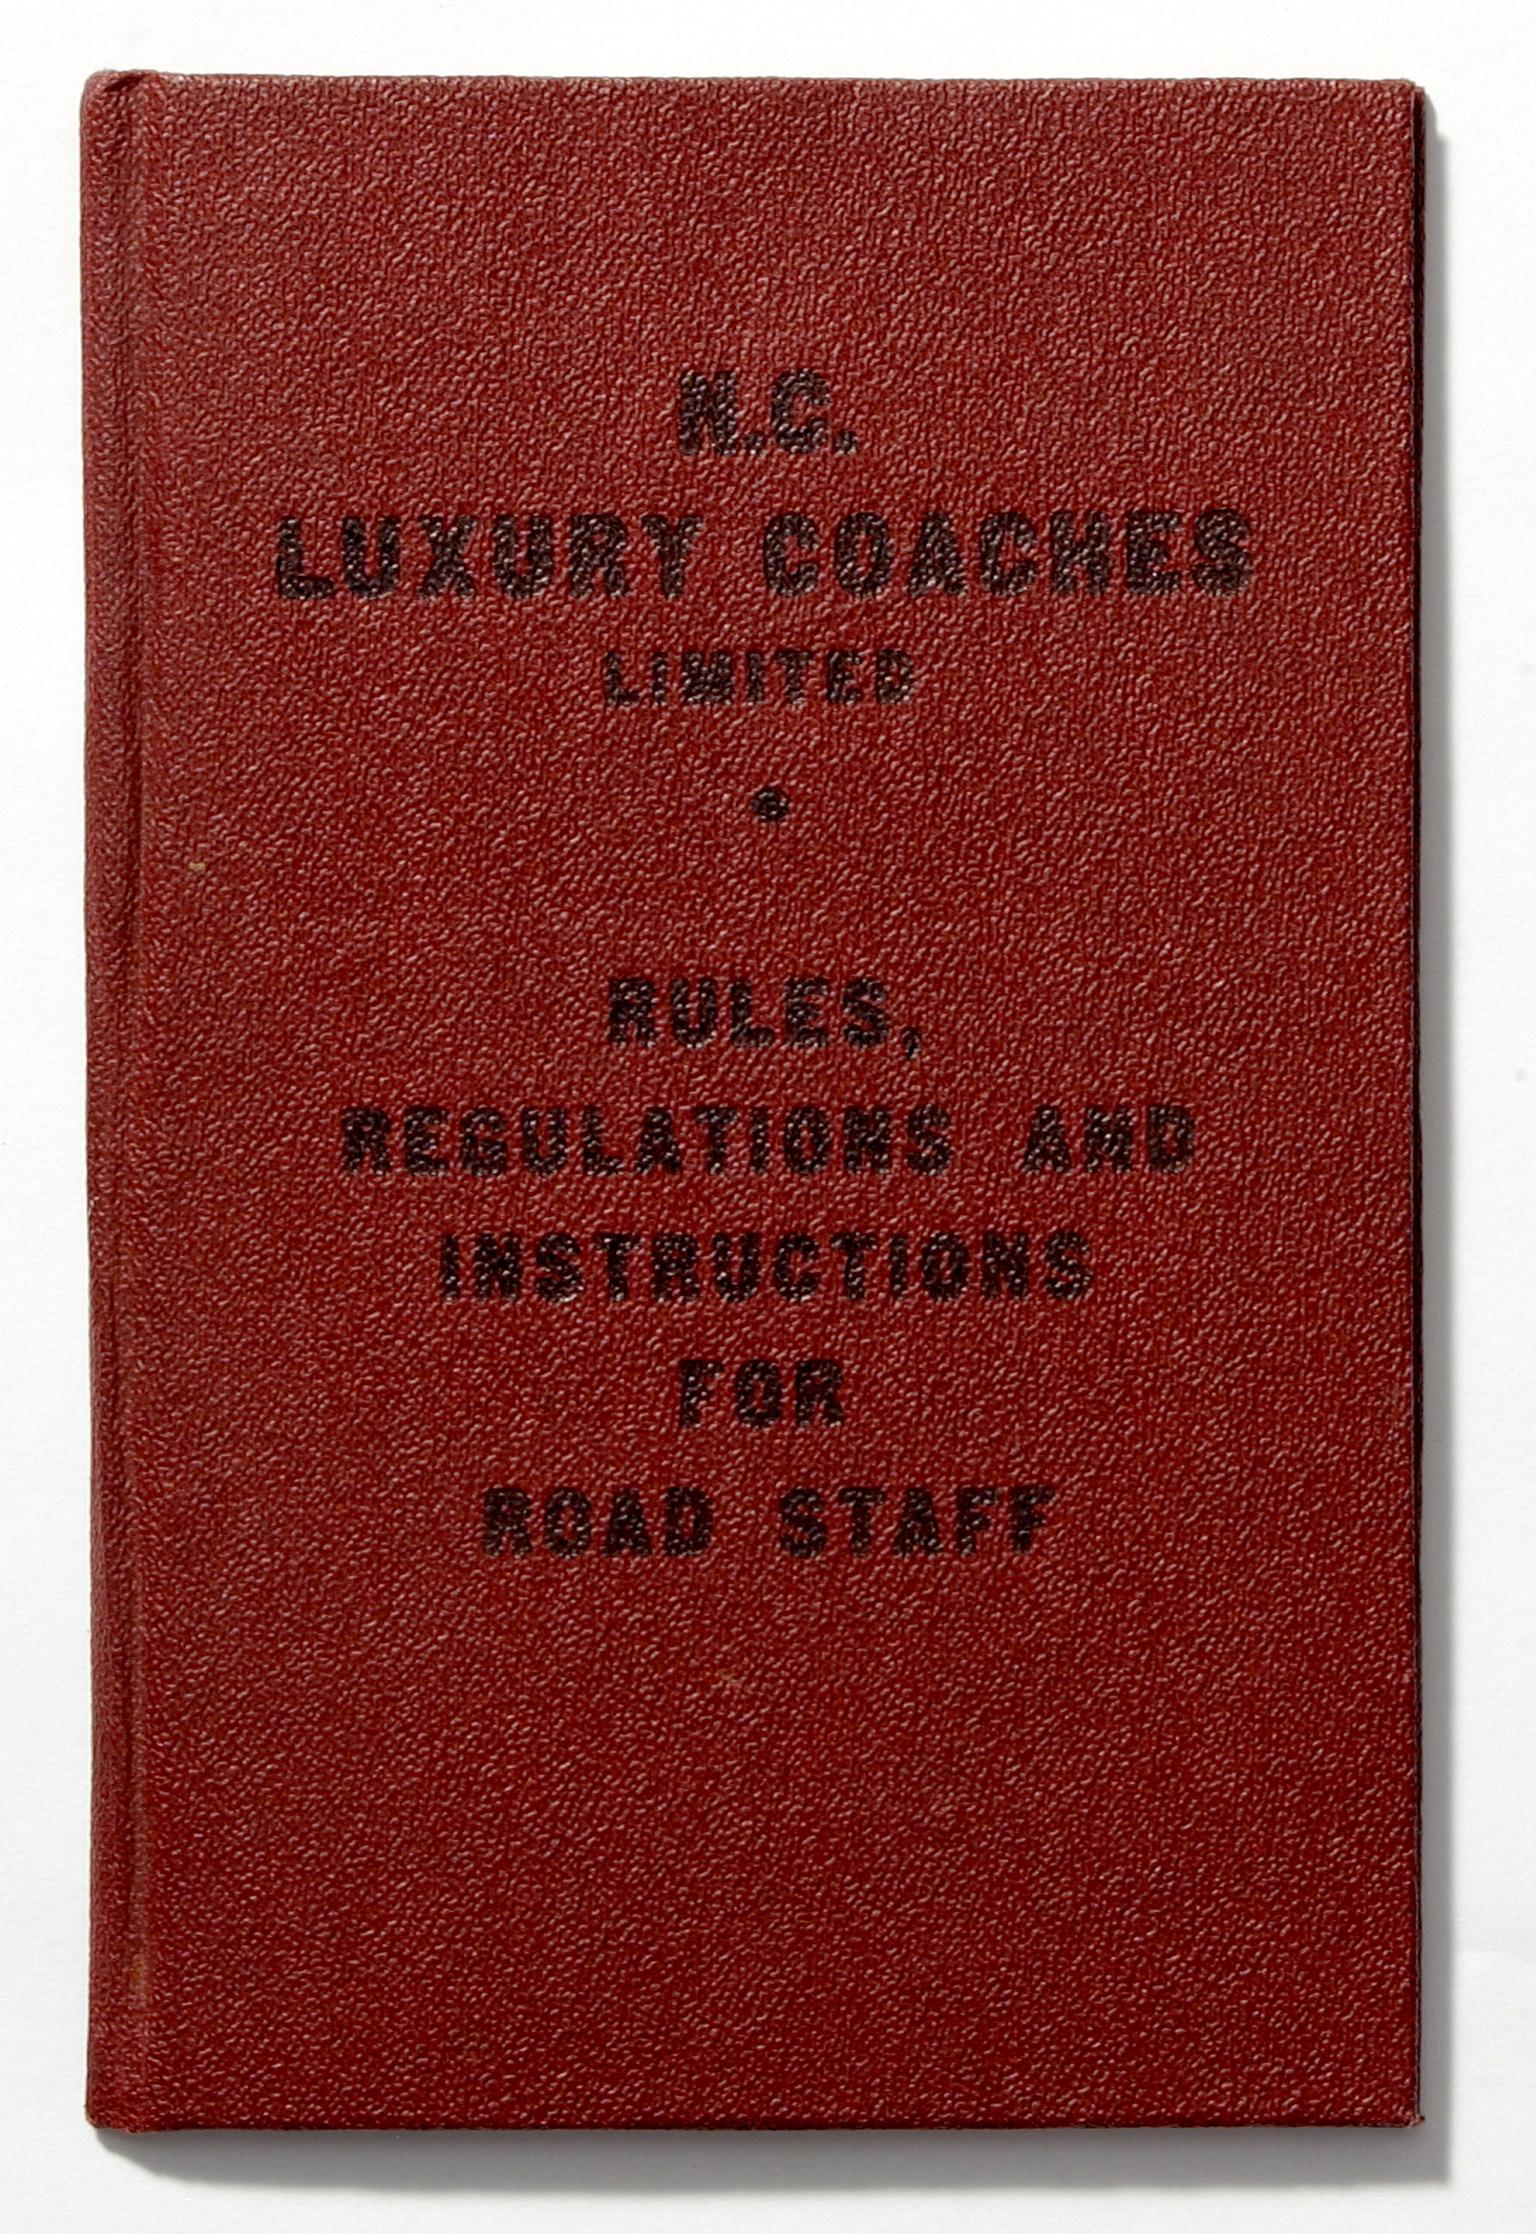 N.C. Luxury Coaches Ltd, rules for road staff